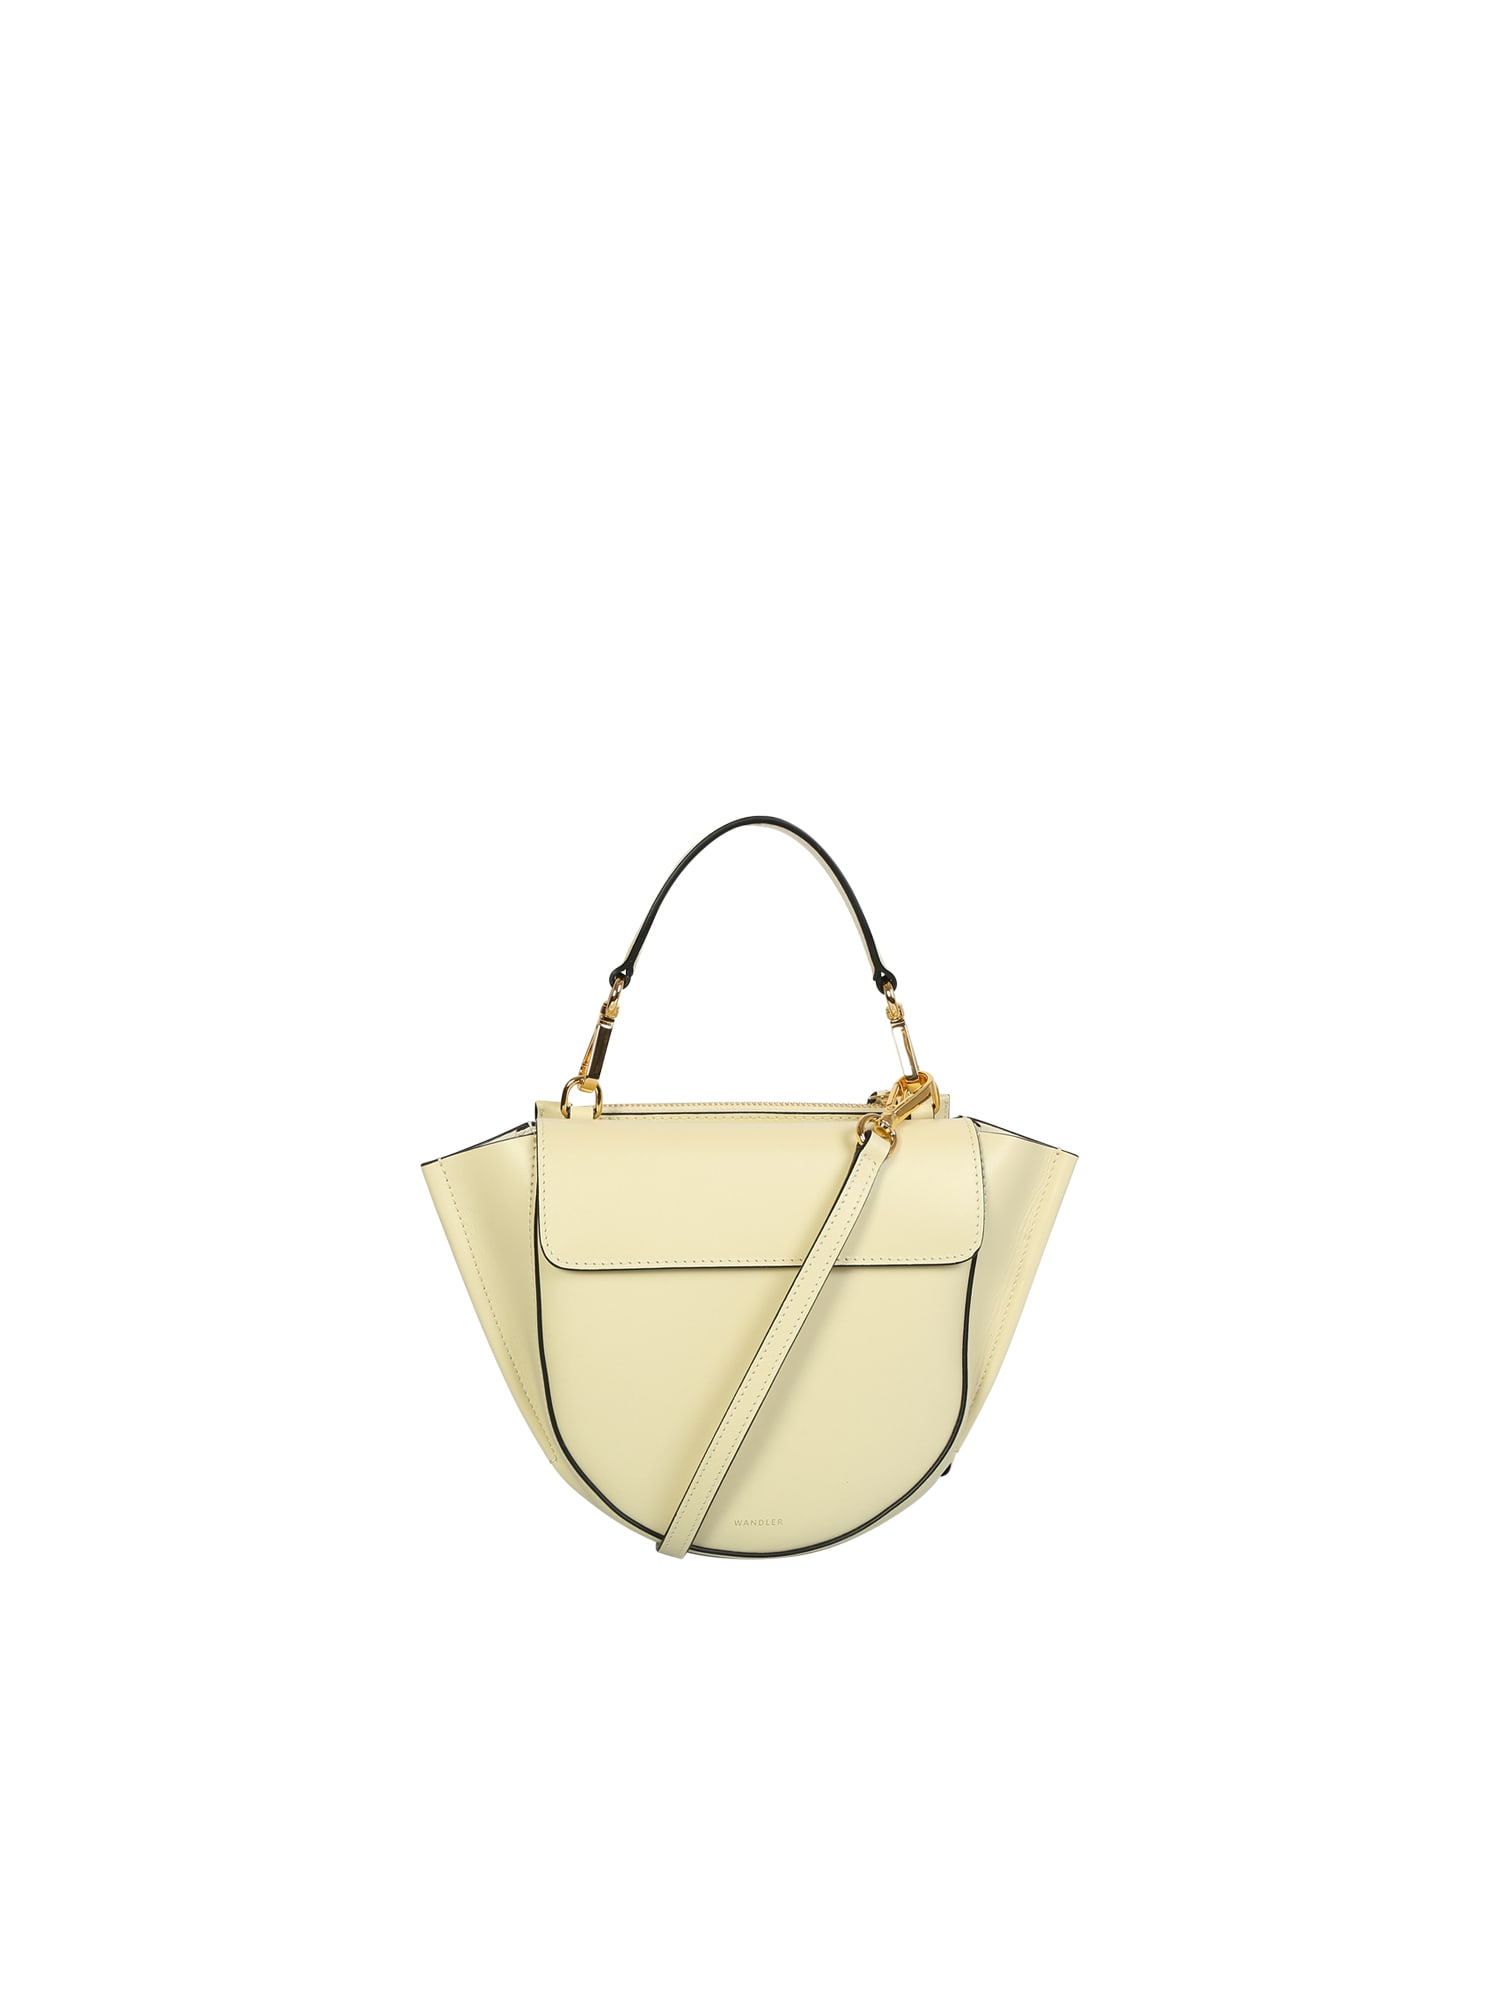 Wandler Hortensia Mini Shell Bag, In This Version The Bag Is Even More Practical And Cool